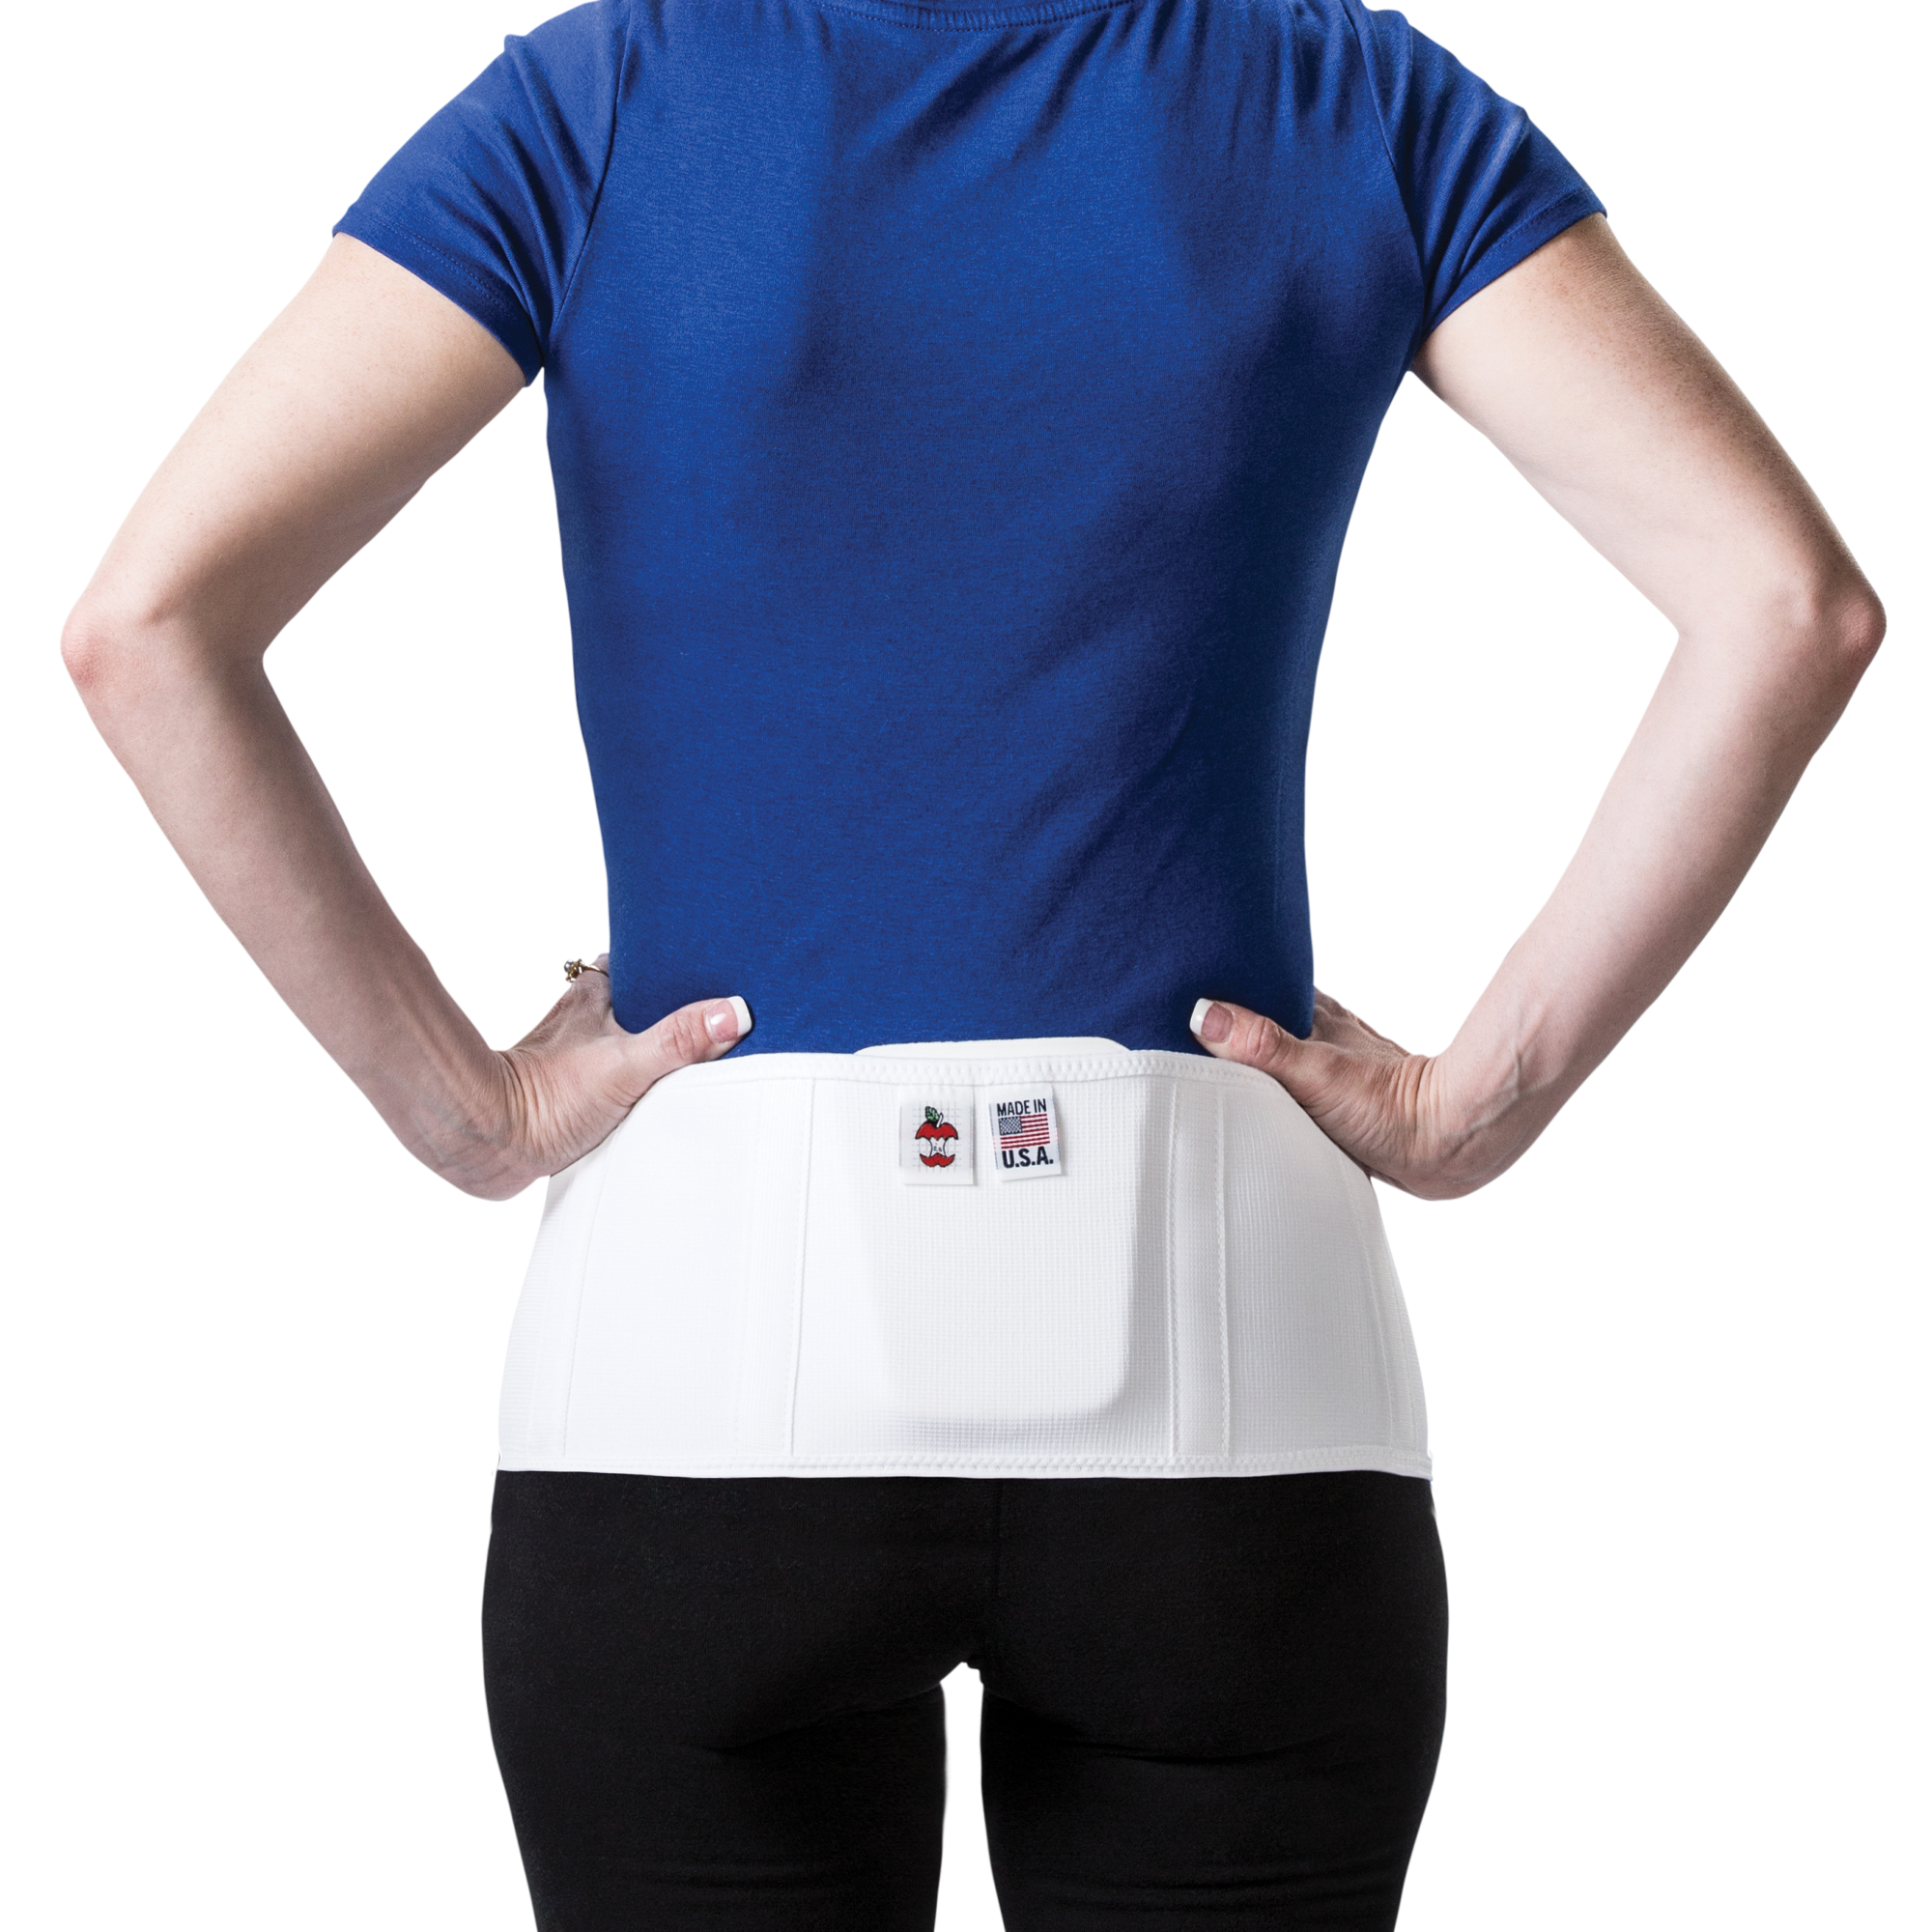 Core Products Elastic Sacroiliac Support with Pad